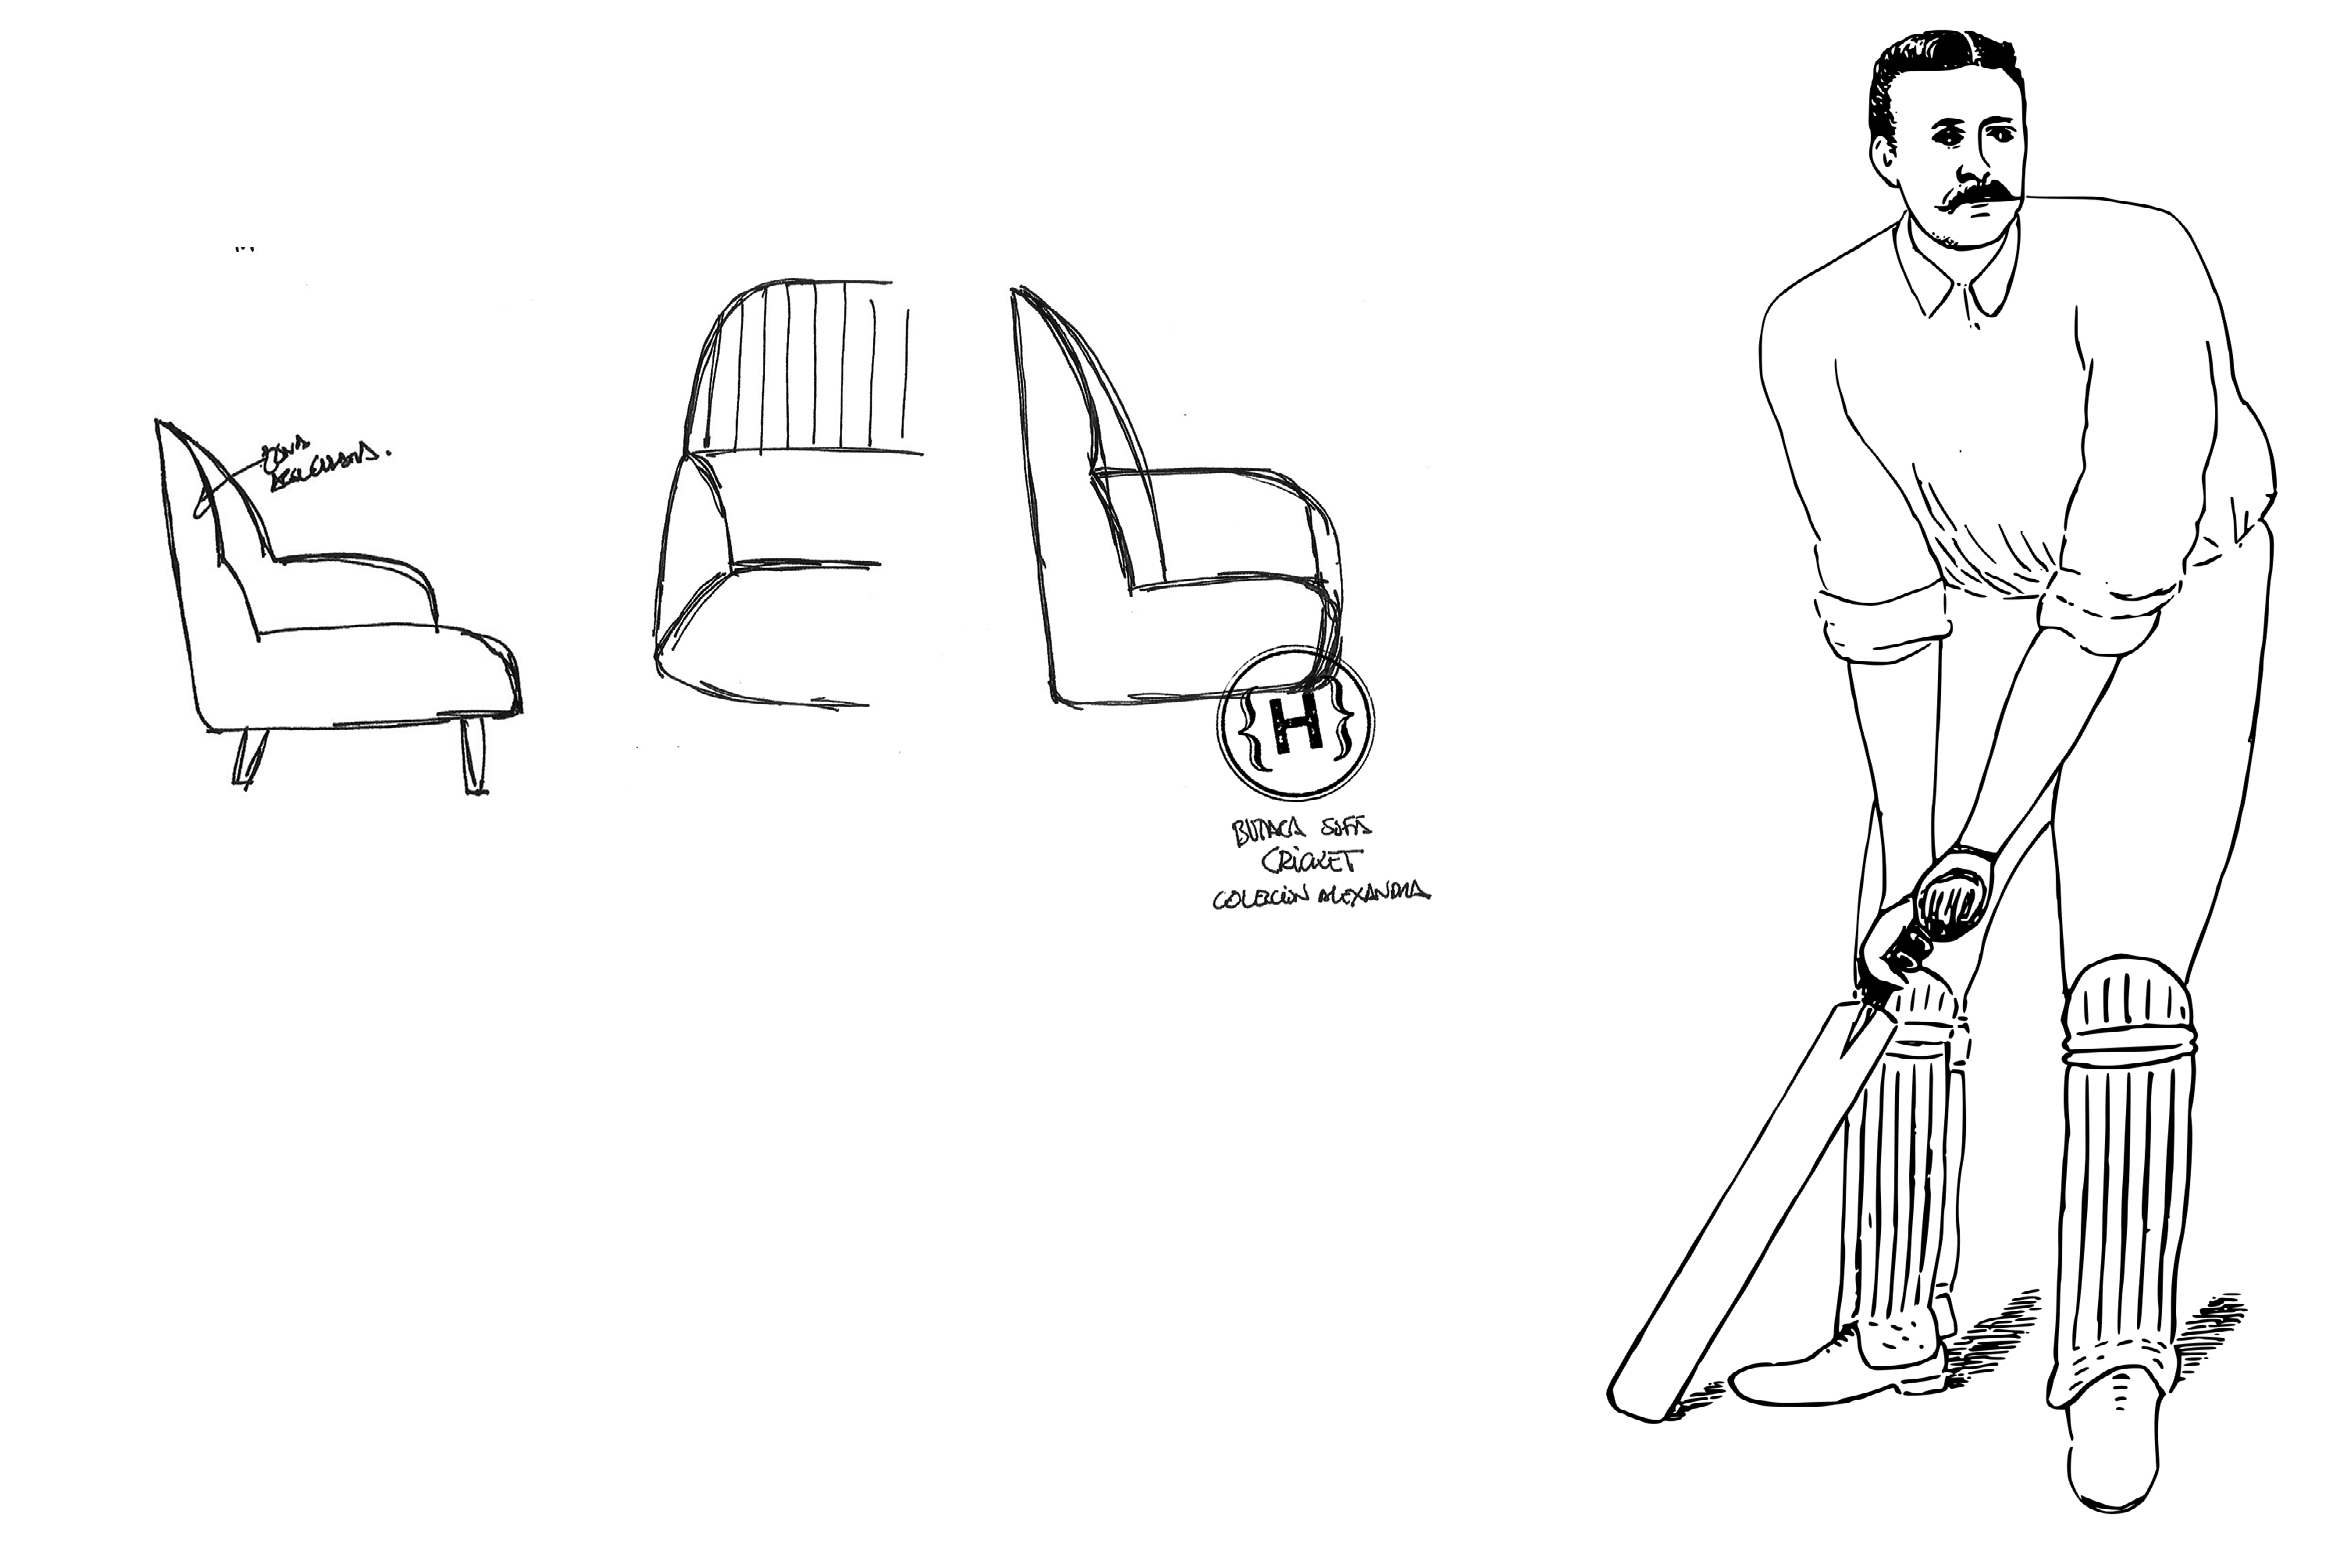 Sketch of the Cricket armchair and the player that inspired JMFerrero of estudihac.